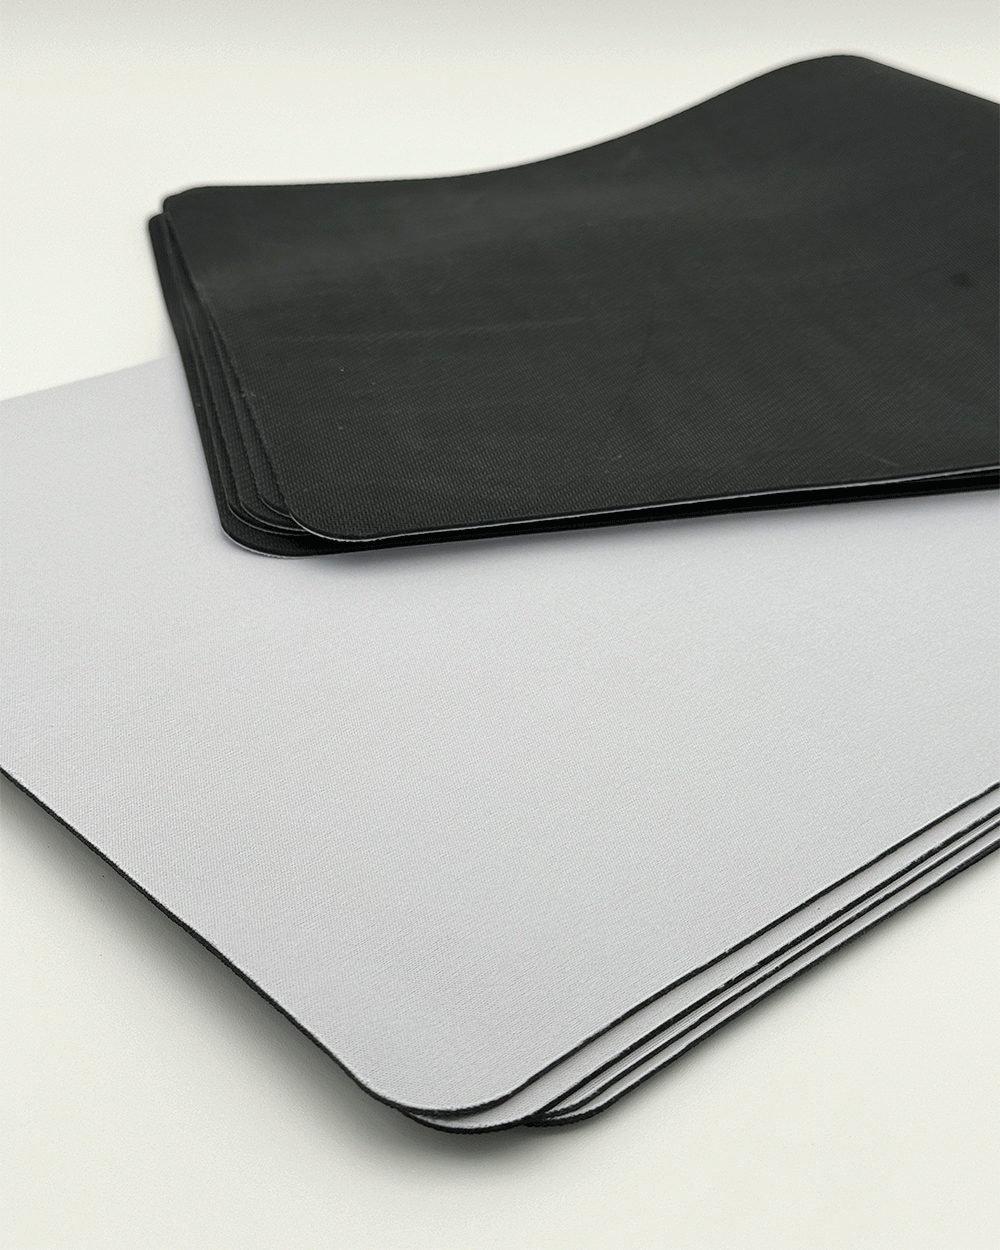 Large Gaming Mouse Pad with Nonslip Base (SIZE 12"X 31")